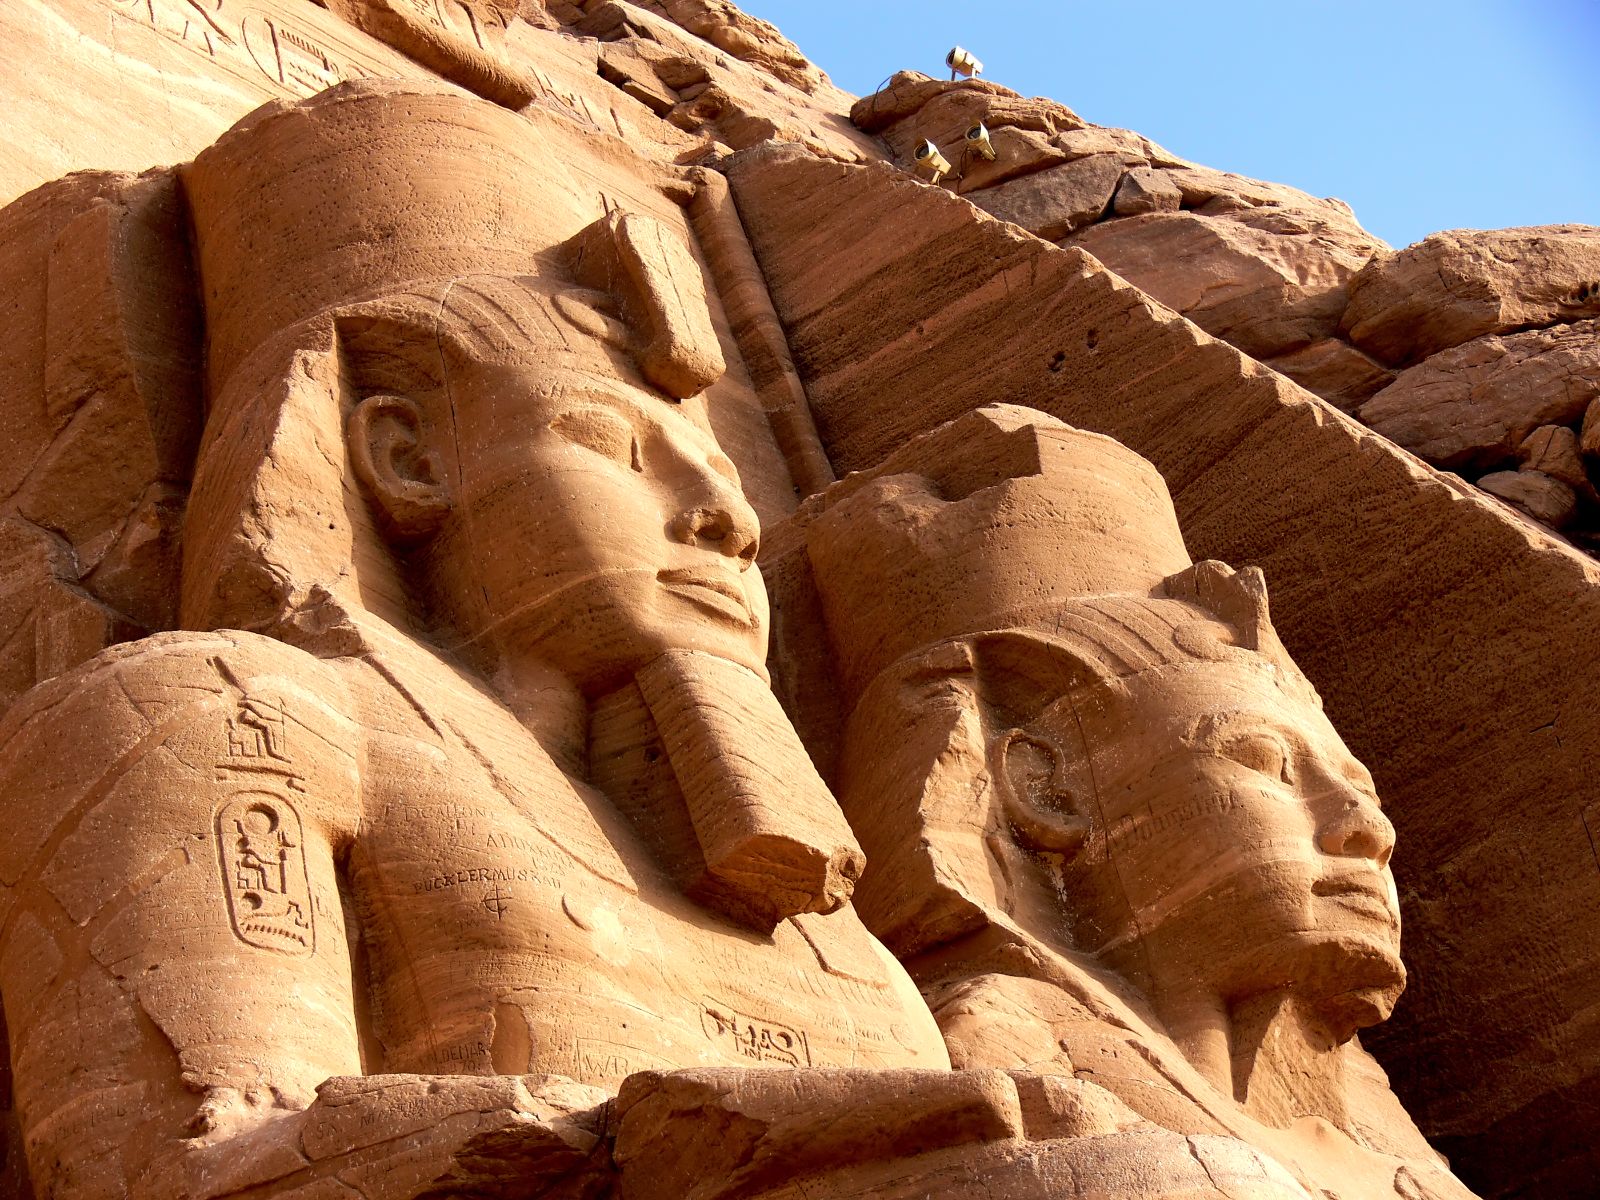 Close up of stone carvings on the Abu Simbel Temple in Egypt